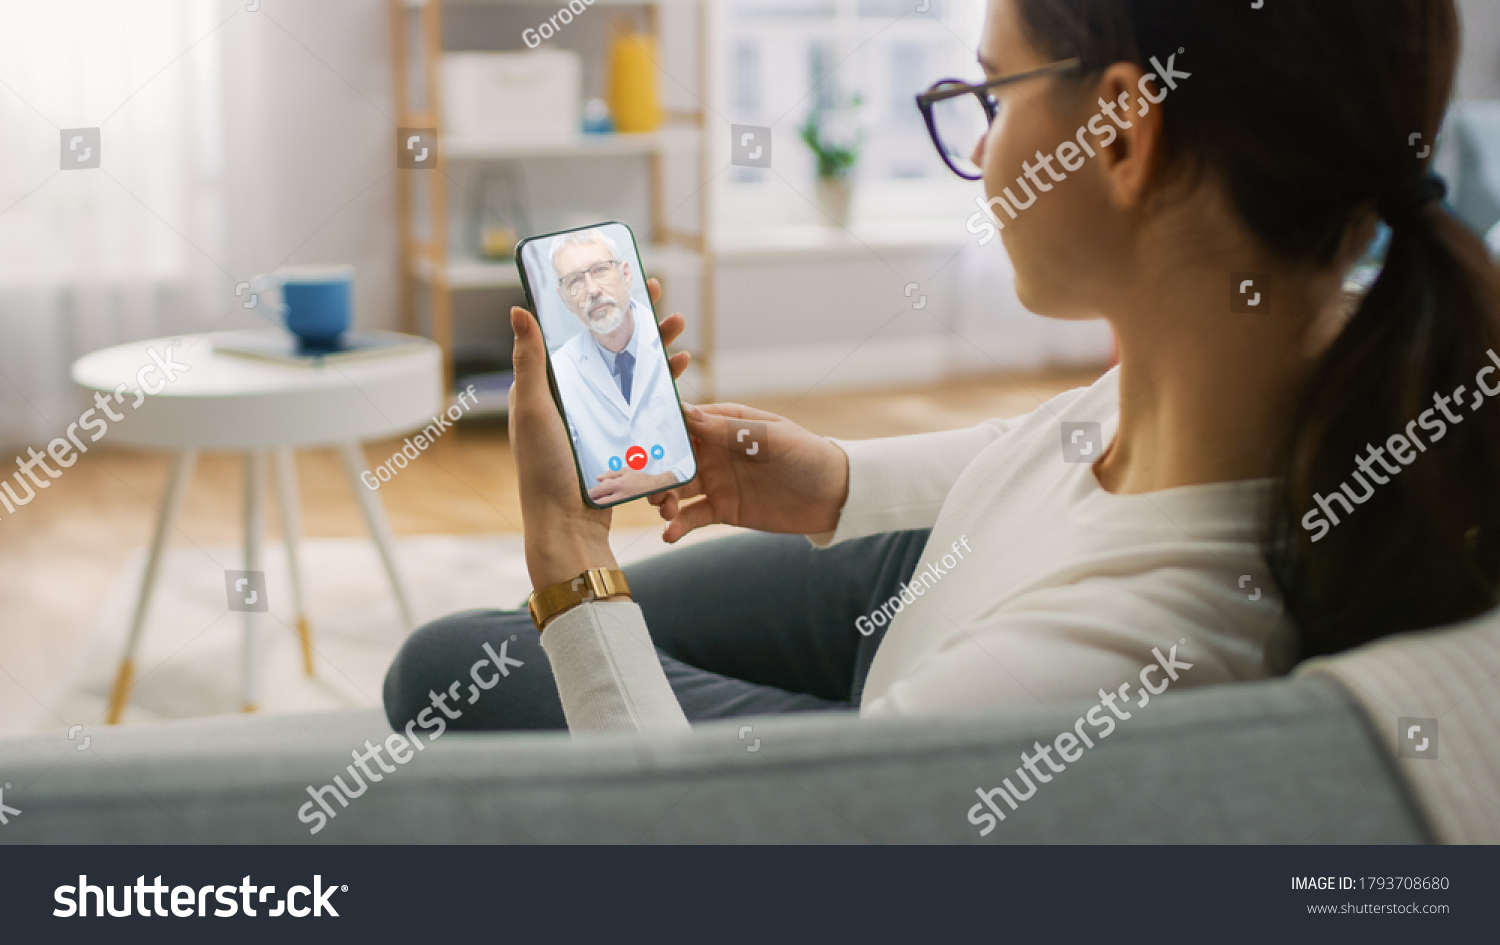 Young Girl Sick at Home Using Smartphone to Talk to Her Doctor via Video Conference Medical App. Woman Checks Possible Symptoms with Professional Physician, Using Online Video Chat Application #1793708680